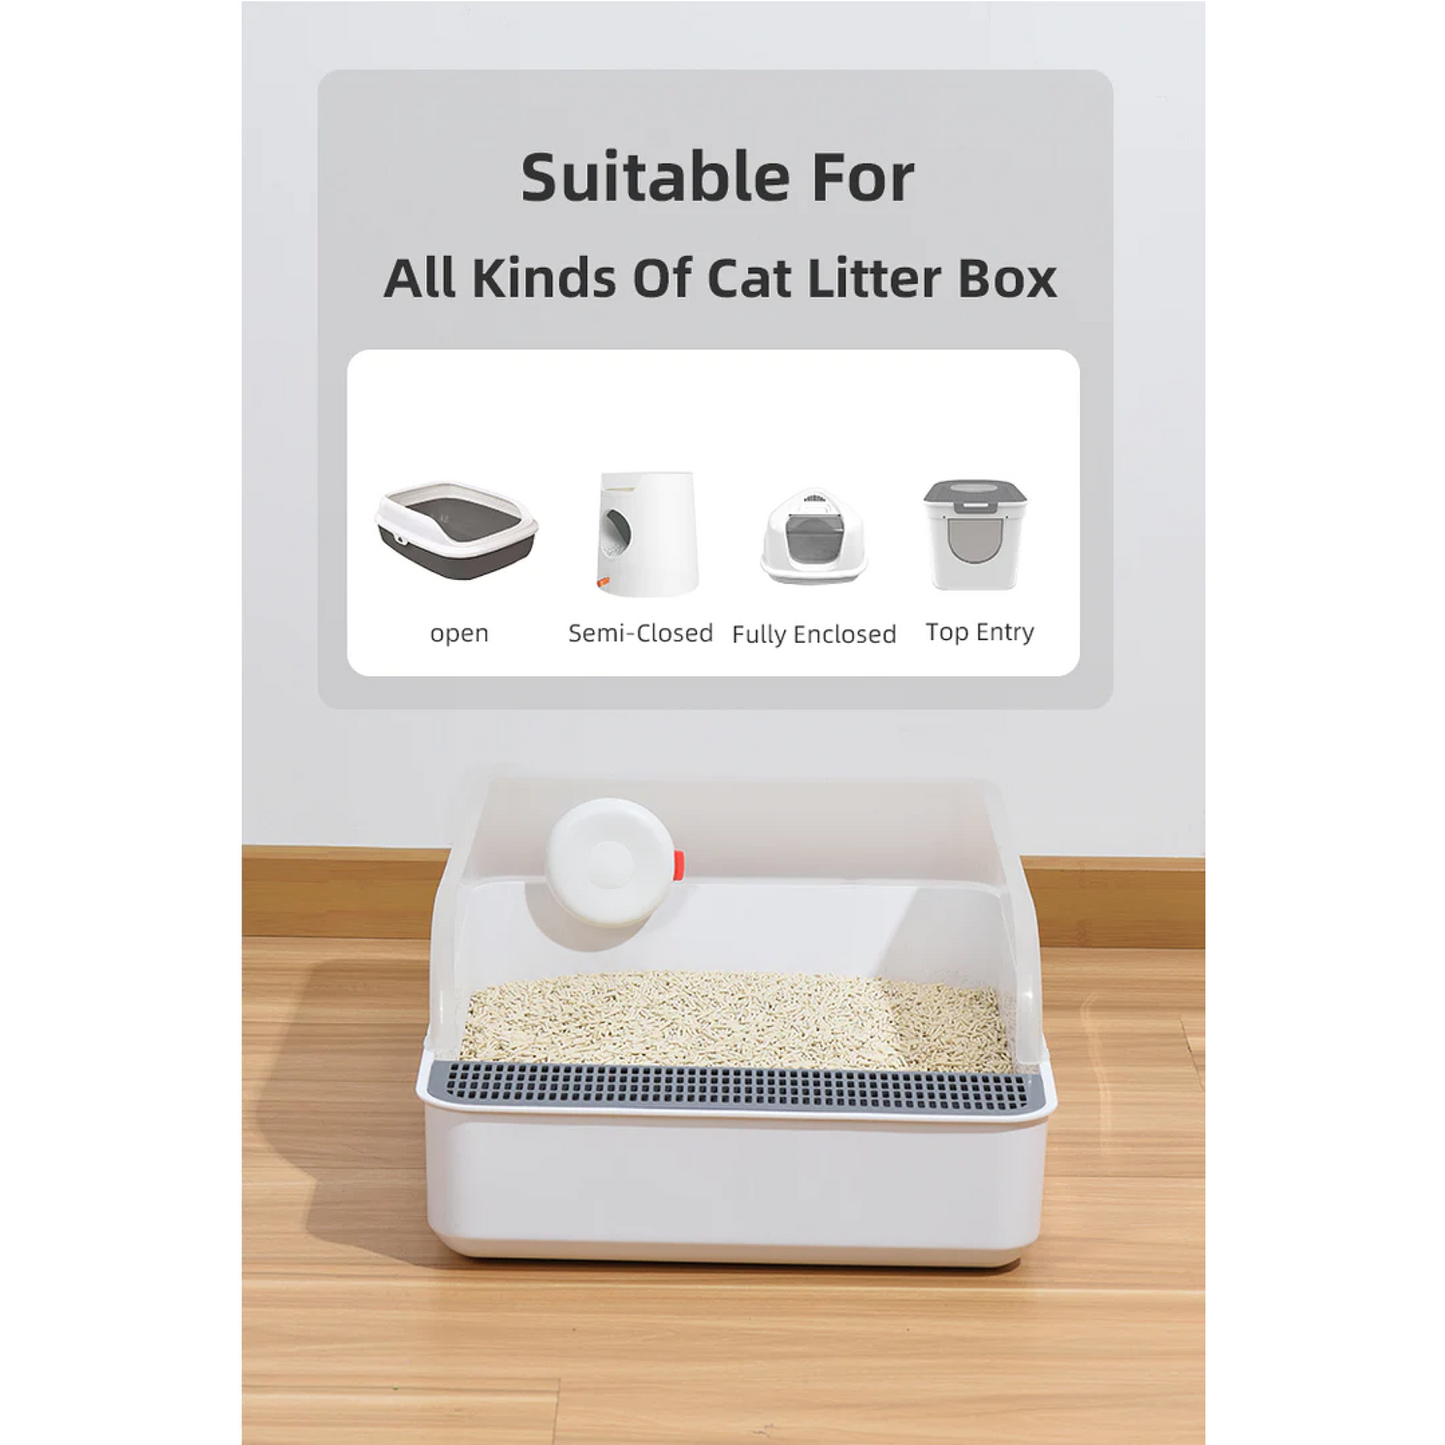 Mayitwill Negative Ion Smart Deodorizer Cat Litter Box Odor Eliminatorwill Negative Ion Smart Deodorizer Cat Litter Box Odor Eliminator – Get Rid of Odors Fast!